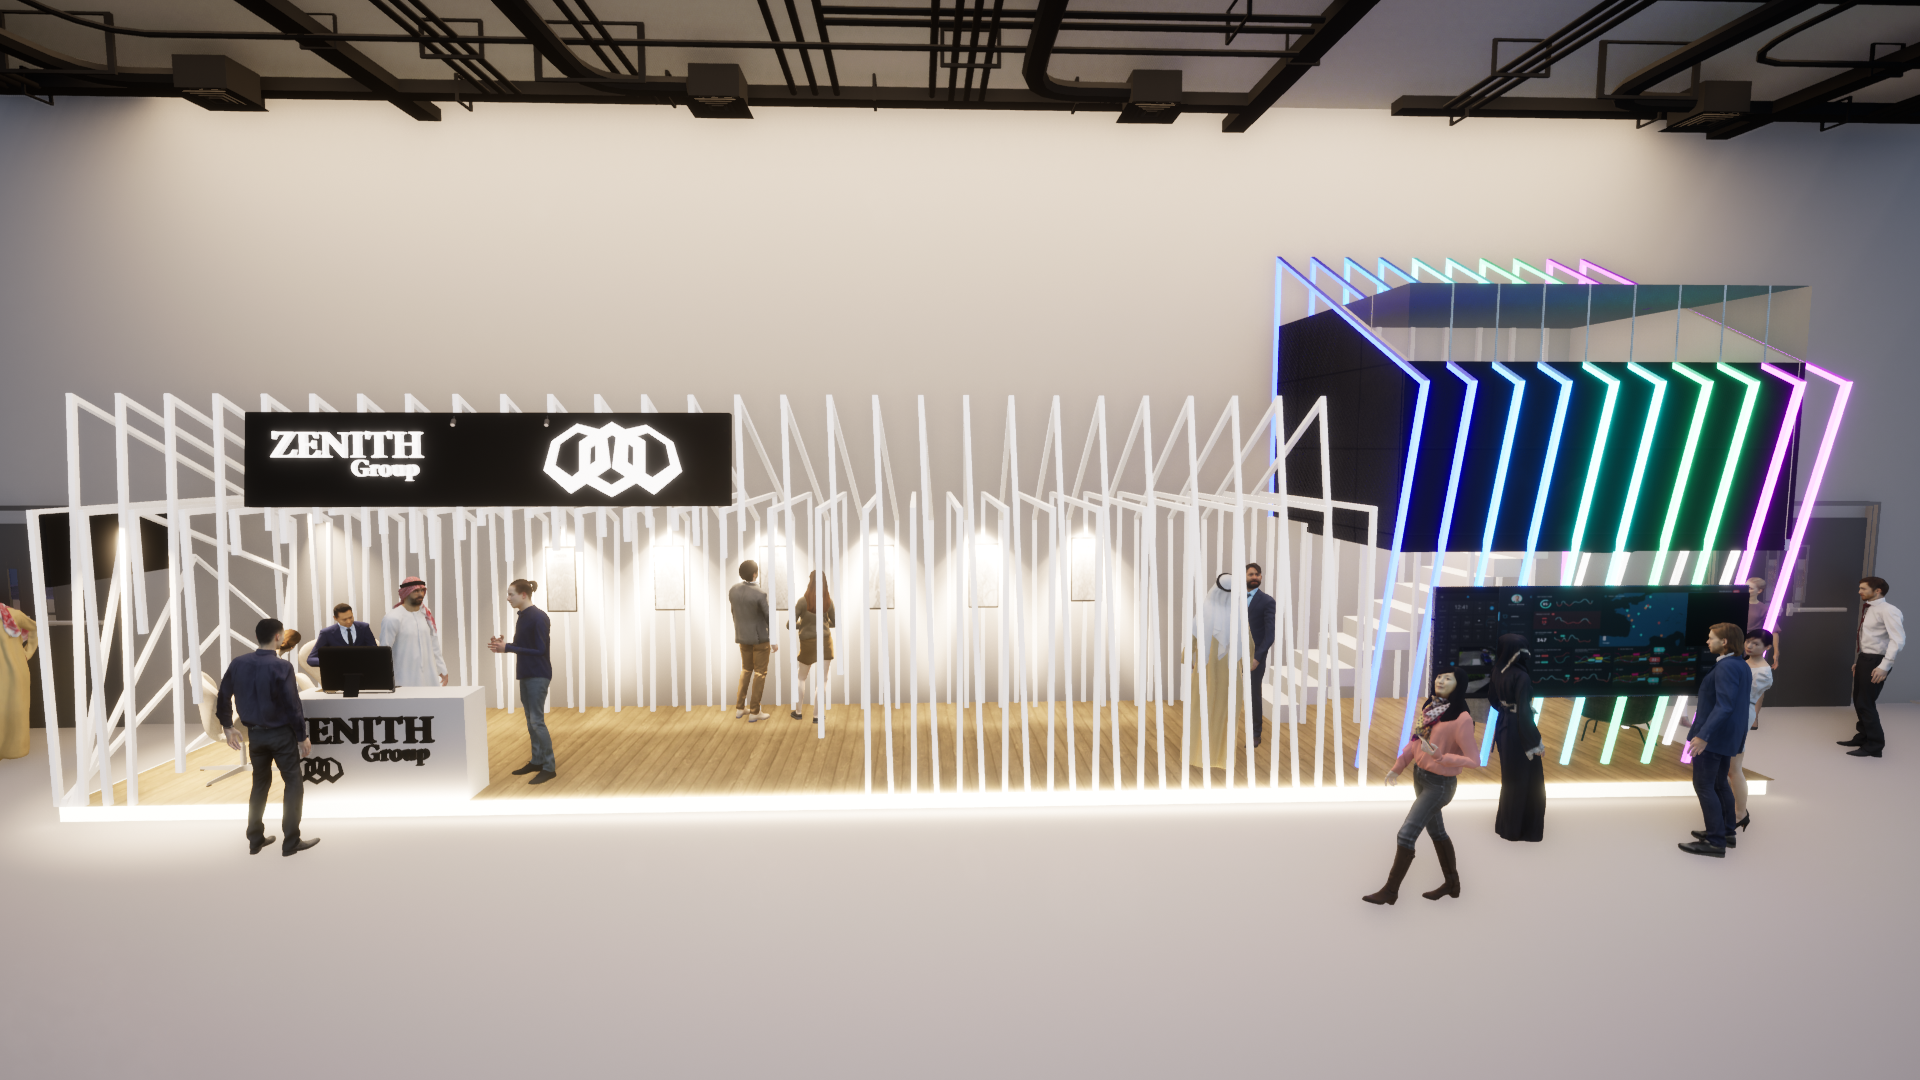 ZENITH Group Stand-Soodeh Abedini-Render (01)